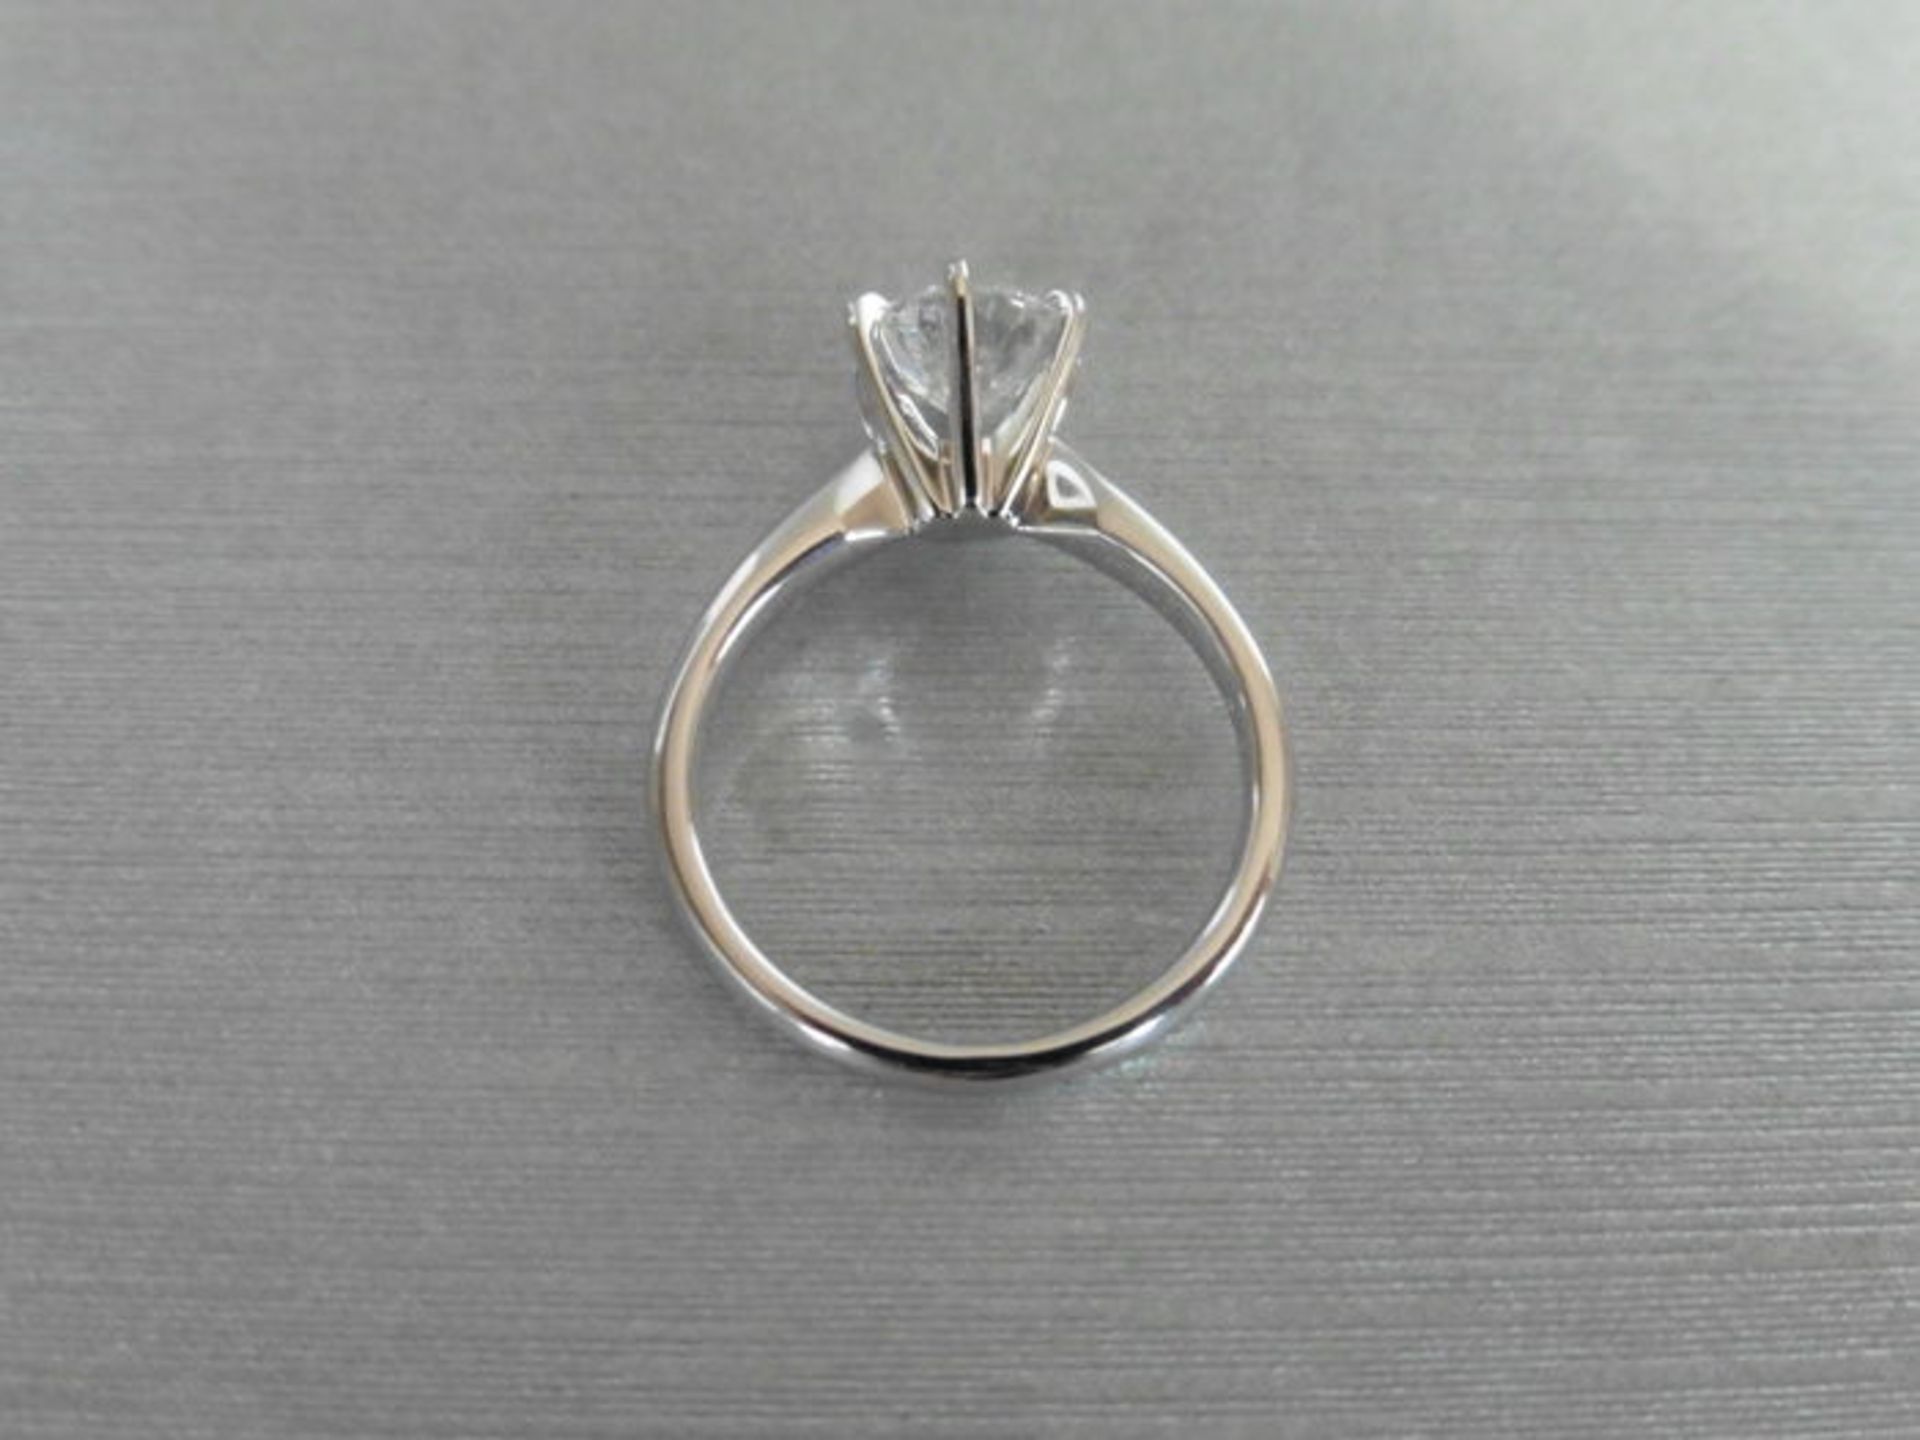 1.16ct Diamond solitaire ring with a brilliant cut diamond, H colour and si3 clarity. Set in - Image 2 of 3